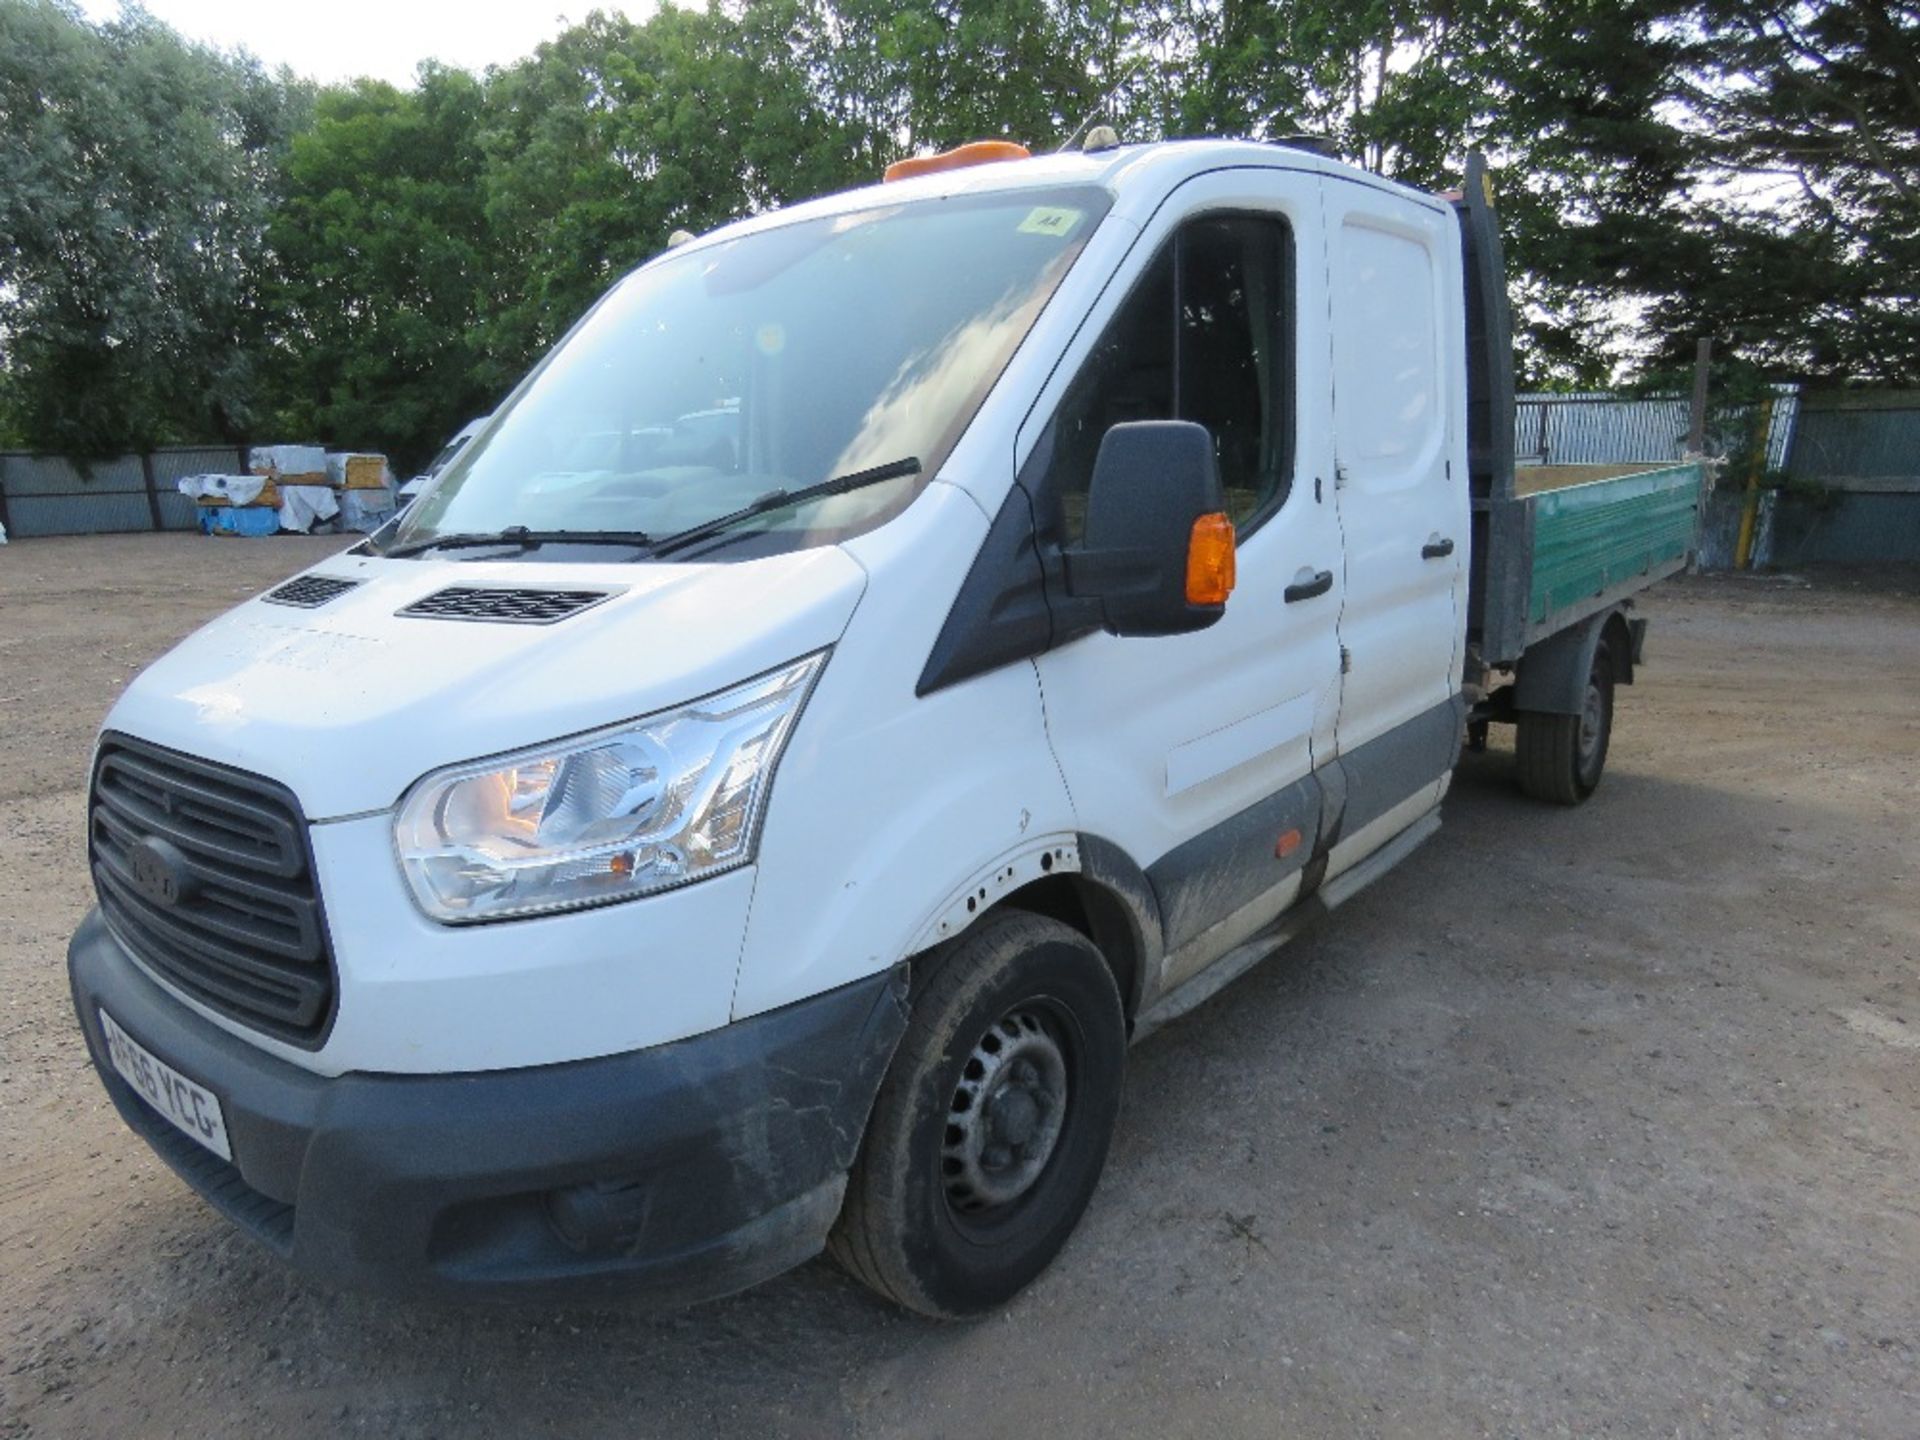 FORD TRANSIT DOUBLE / CREW CAB TIPPER TRUCK REG:AF66 YCG. WITH V5 AND MOT UNTIL 29TH SEPTEMBER 2023. - Image 4 of 17